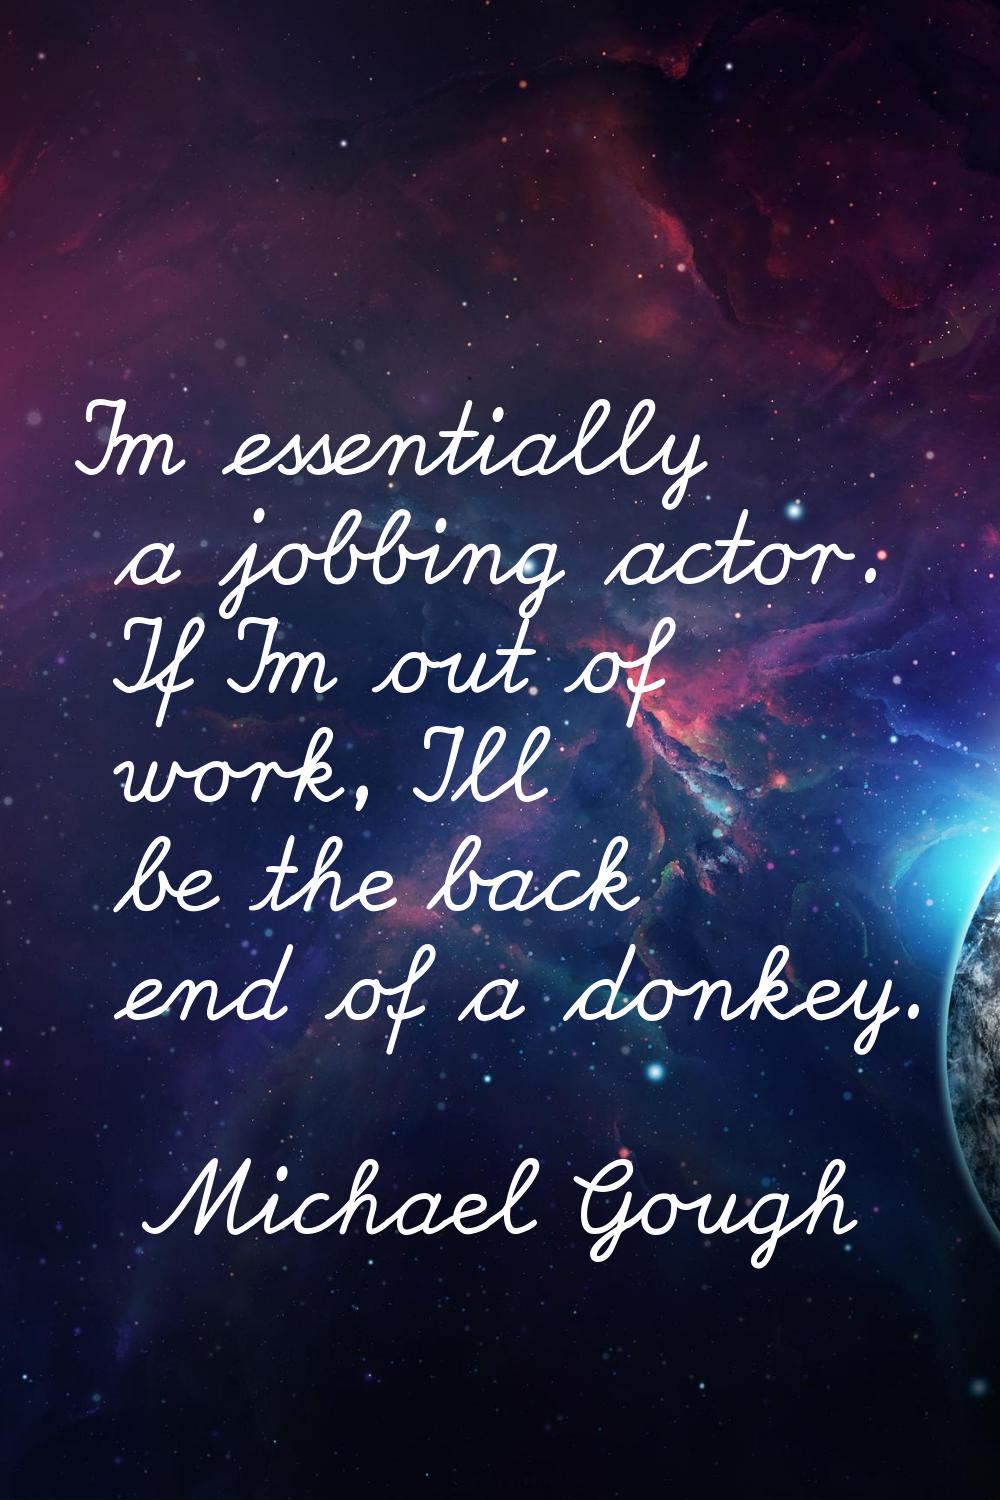 I'm essentially a jobbing actor. If I'm out of work, I'll be the back end of a donkey.